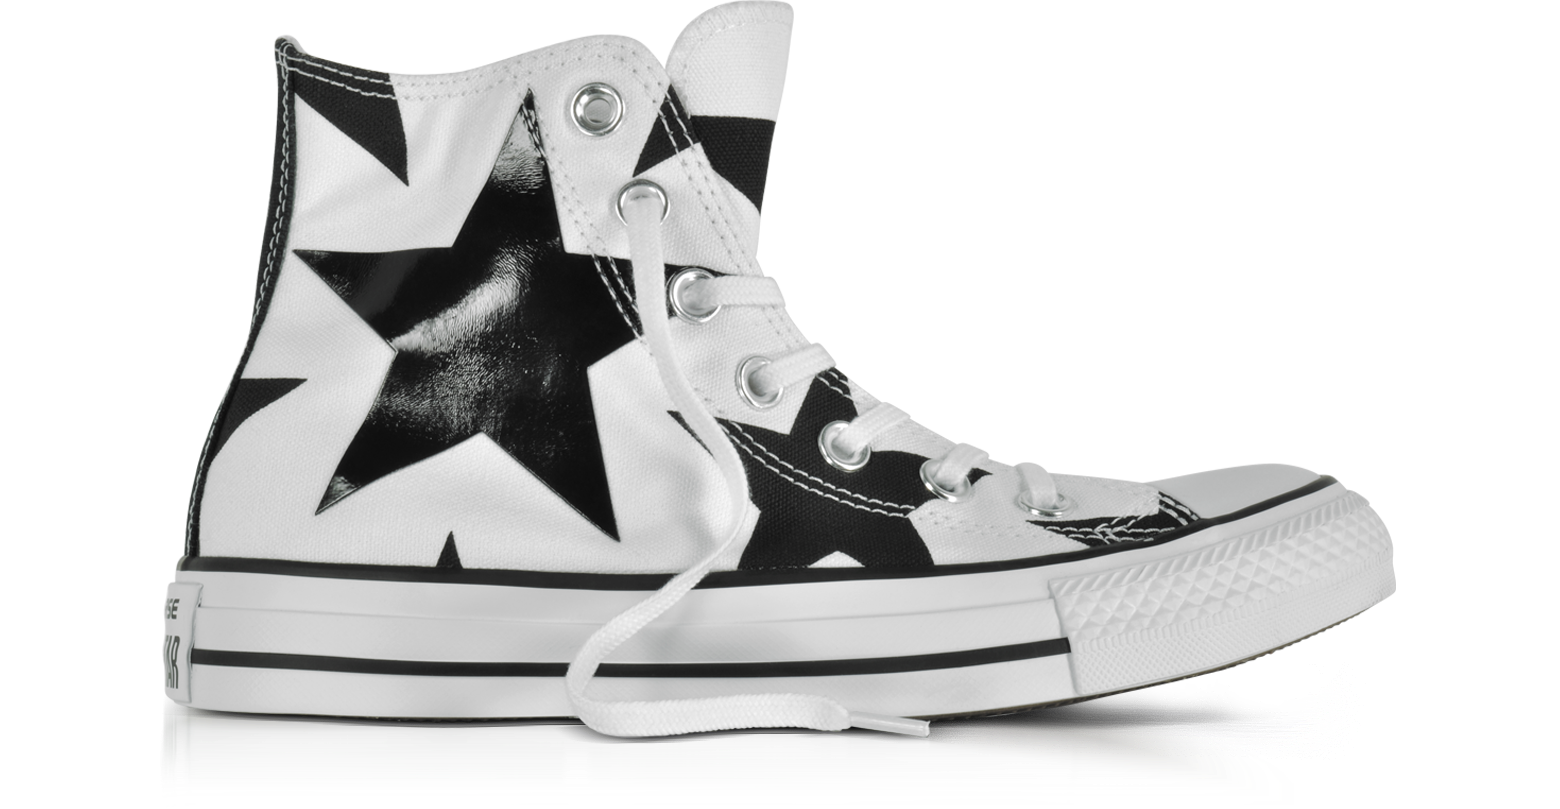 Chuck Taylor All Star High Sneakers in Canvas Bianco con Stelle Nere  Oversize Converse Limited Edition 4.5 (37 EU) su FORZIERI